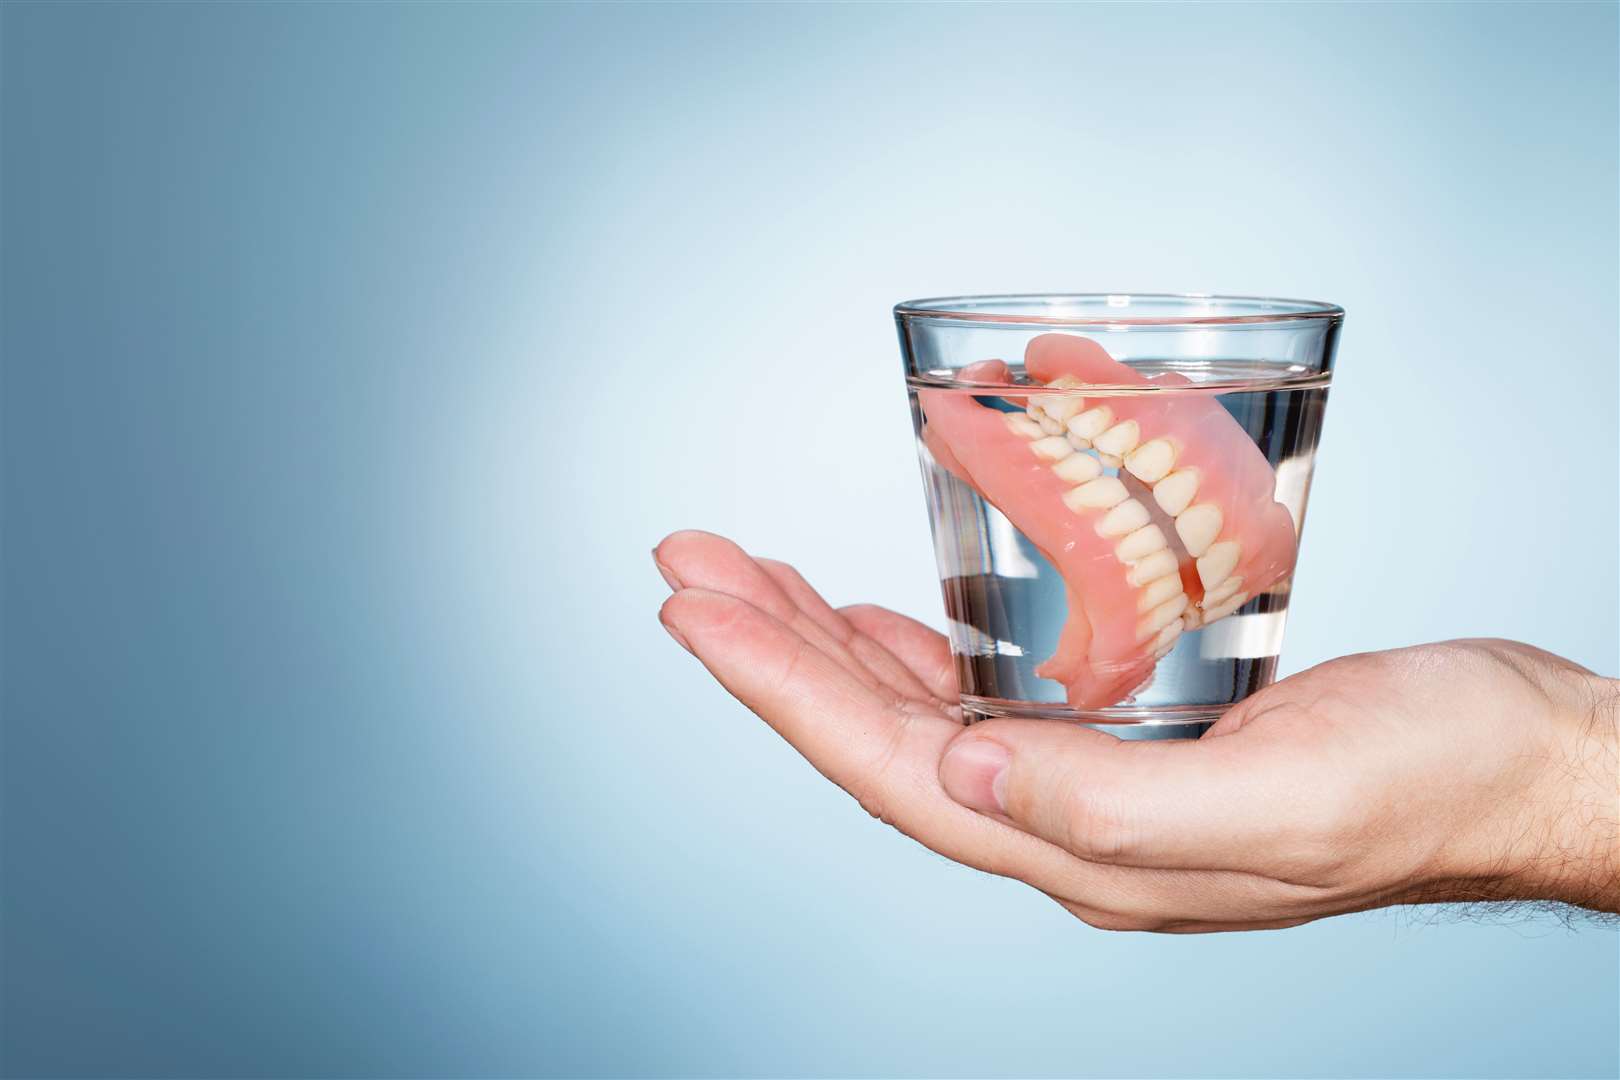 Dentures have to go in a glass of water at night.